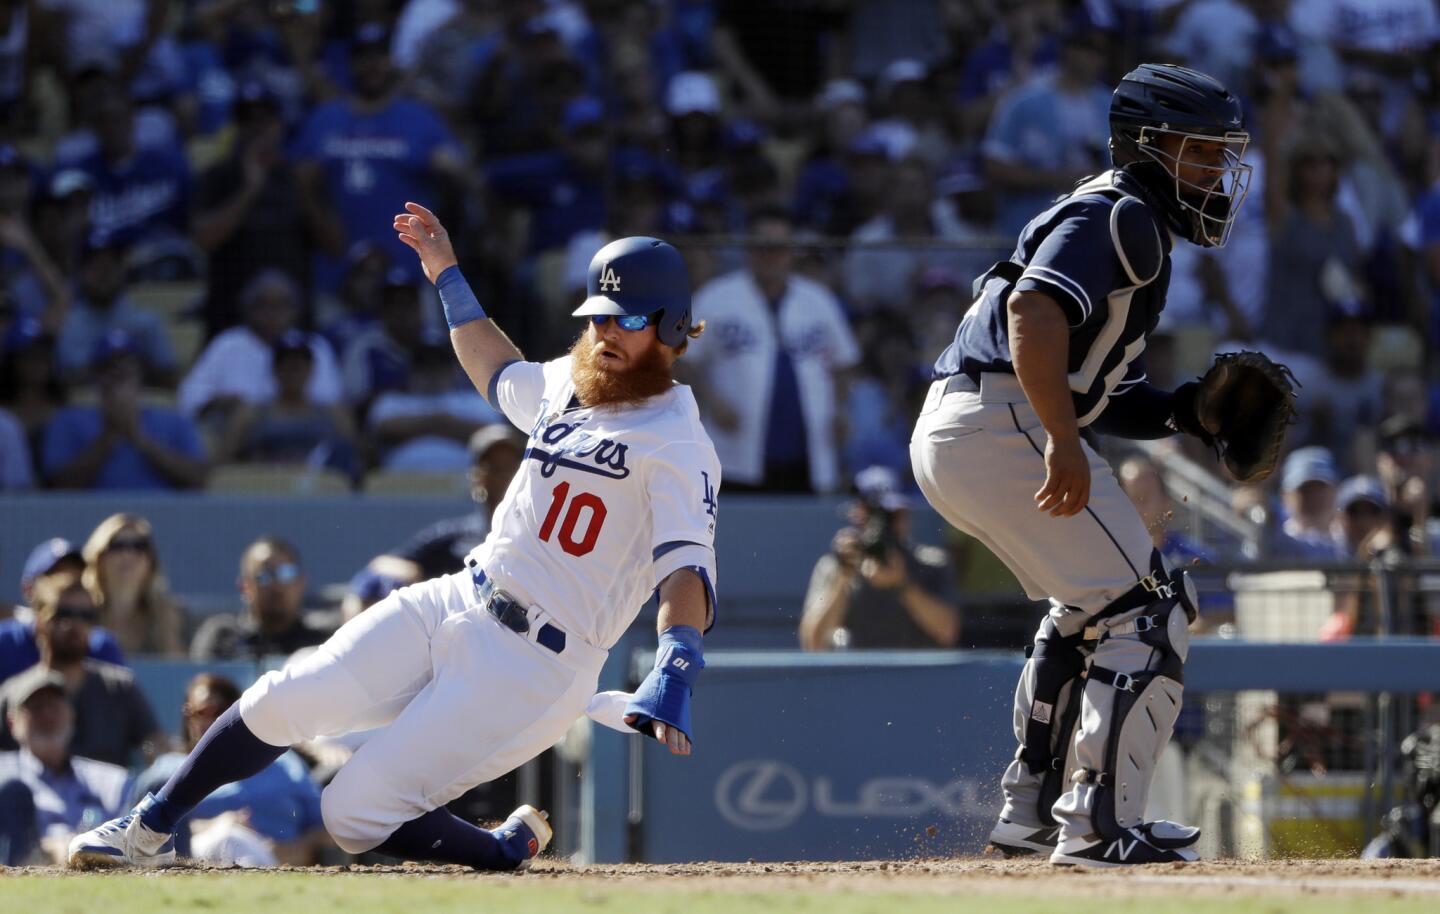 Los Angeles Dodgers' Justin Turner (10) scores past San Diego Padres catcher Francisco Mejia after a single by Max Muncy during the fifth inning of a baseball game Sunday, Sept. 23, 2018, in Los Angeles.